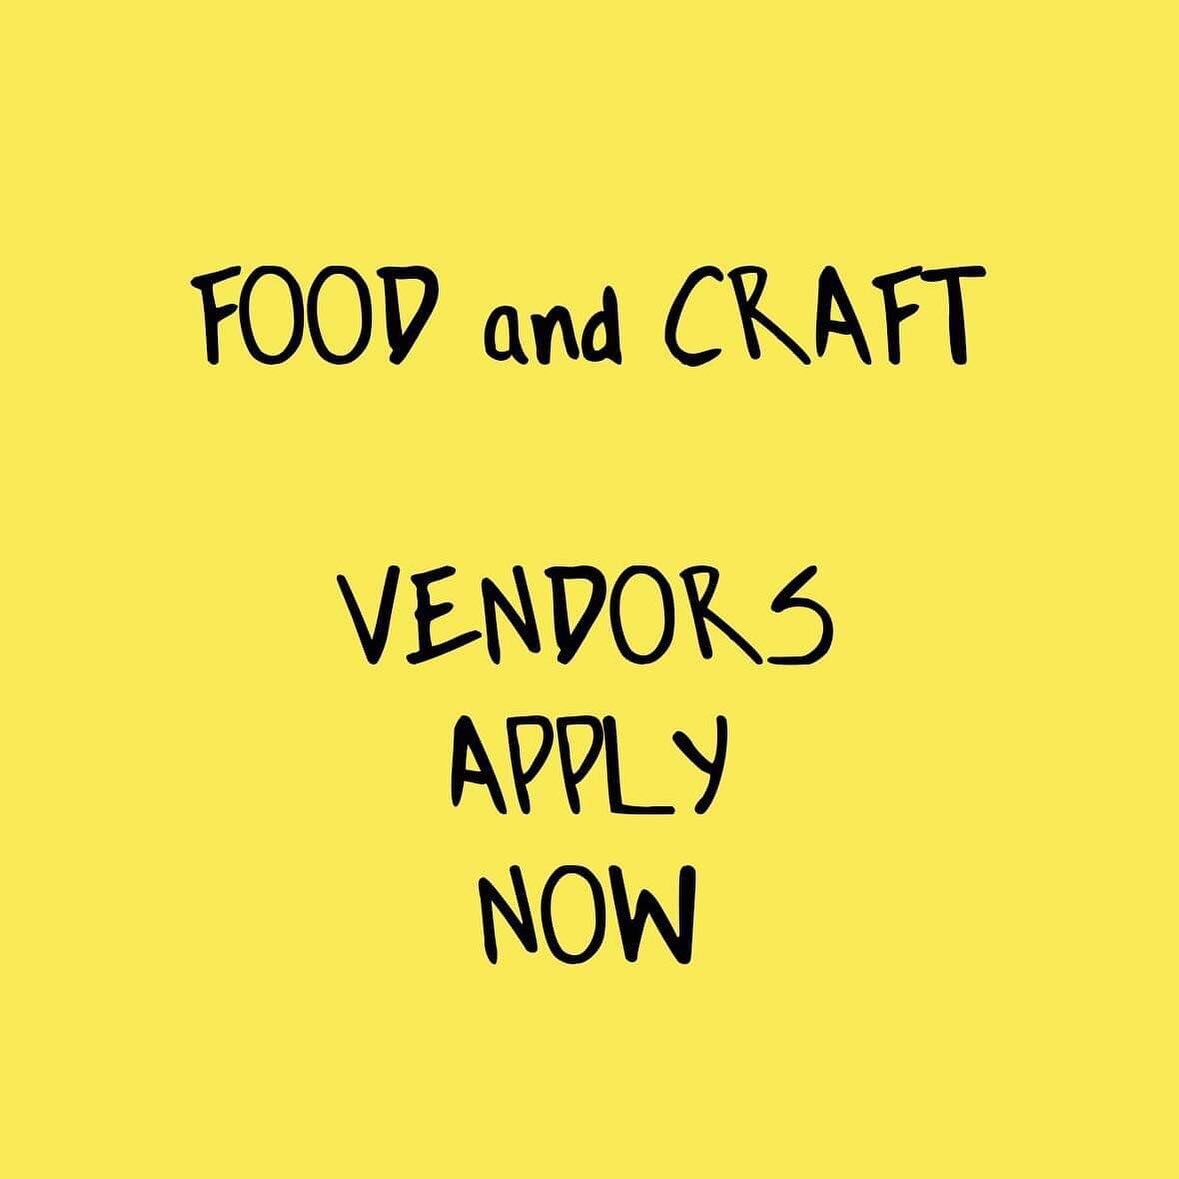 We are looking for the best food and craft vendors in San Diego to join our line up. If you have something great to offer and want to be a part of our awesome markets, get in touch now. Apply via the link in our bio.